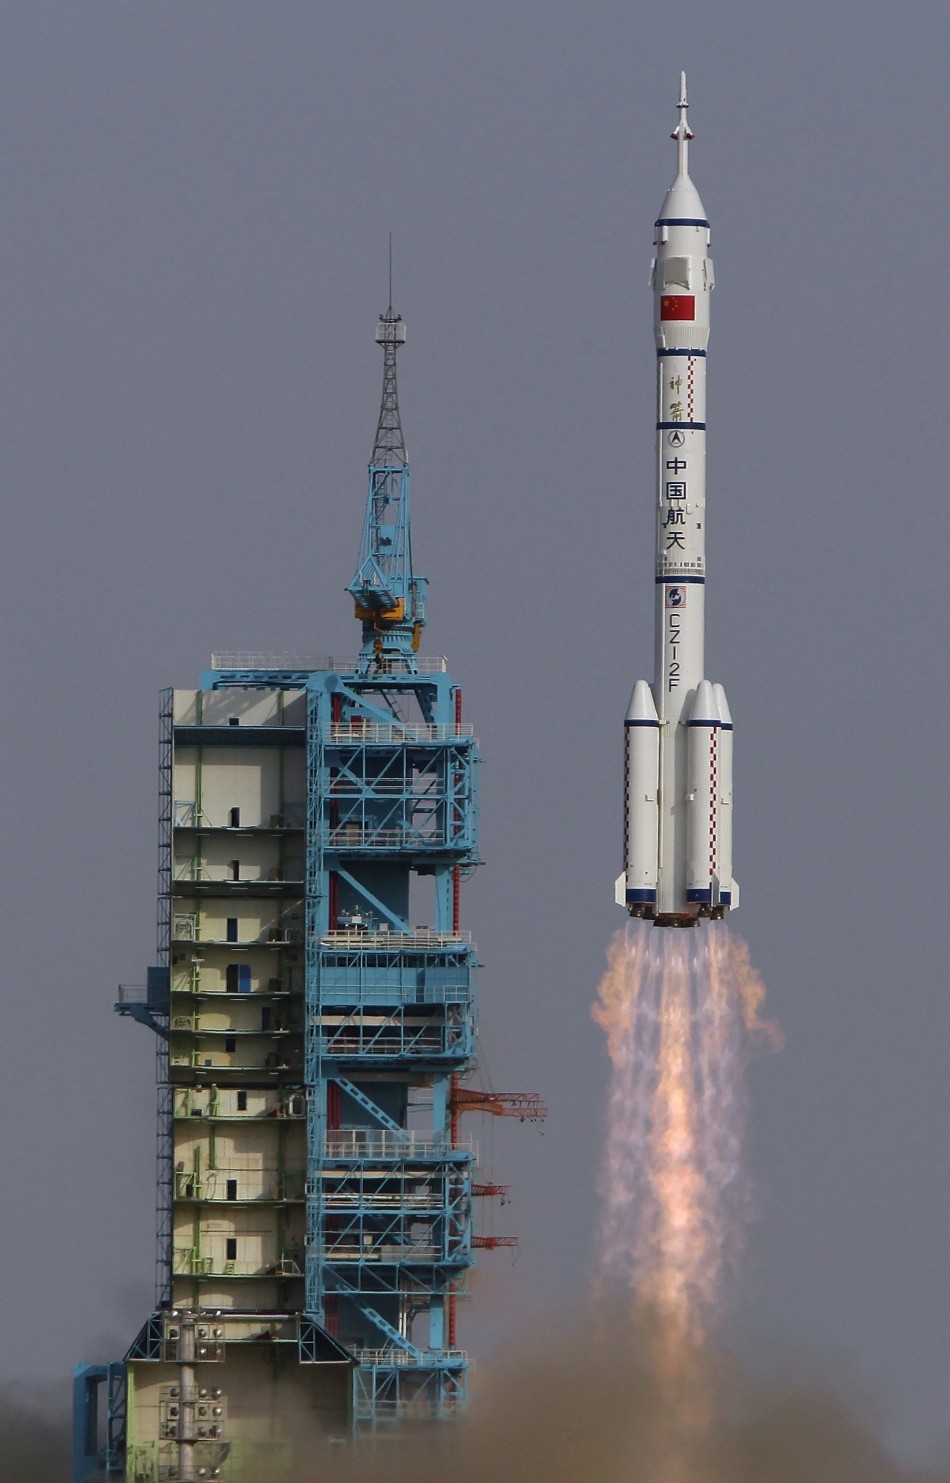 The Long March II-F rocket loaded with a Shenzhou-9 manned spacecraft